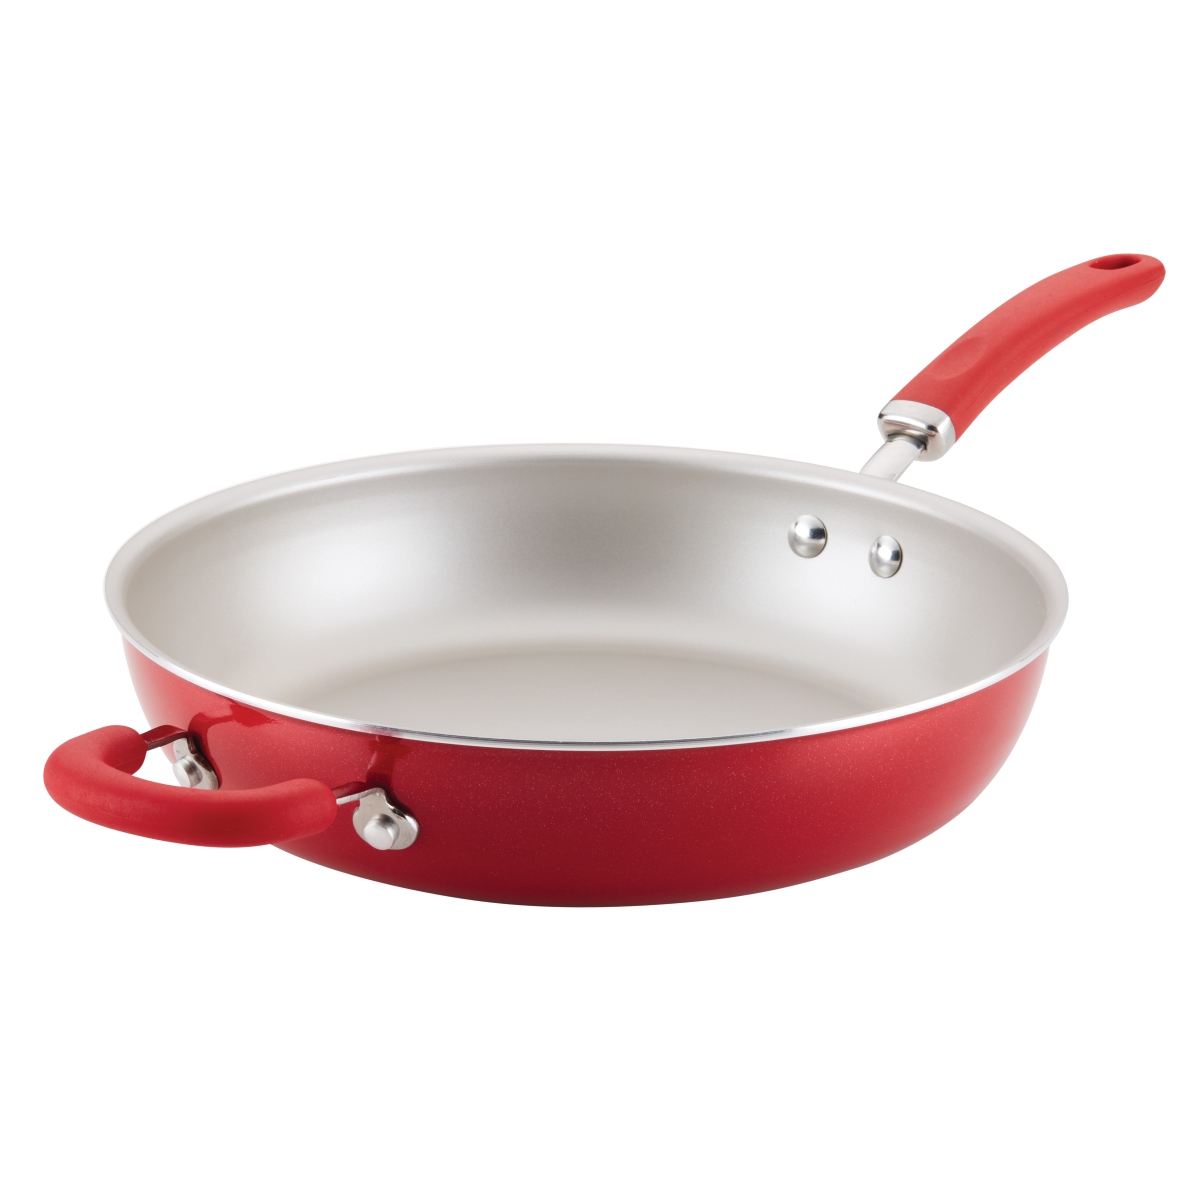 12000 Create Delicious Aluminum Nonstick Deep Skillet, 12.5 In. - Red Shimmer